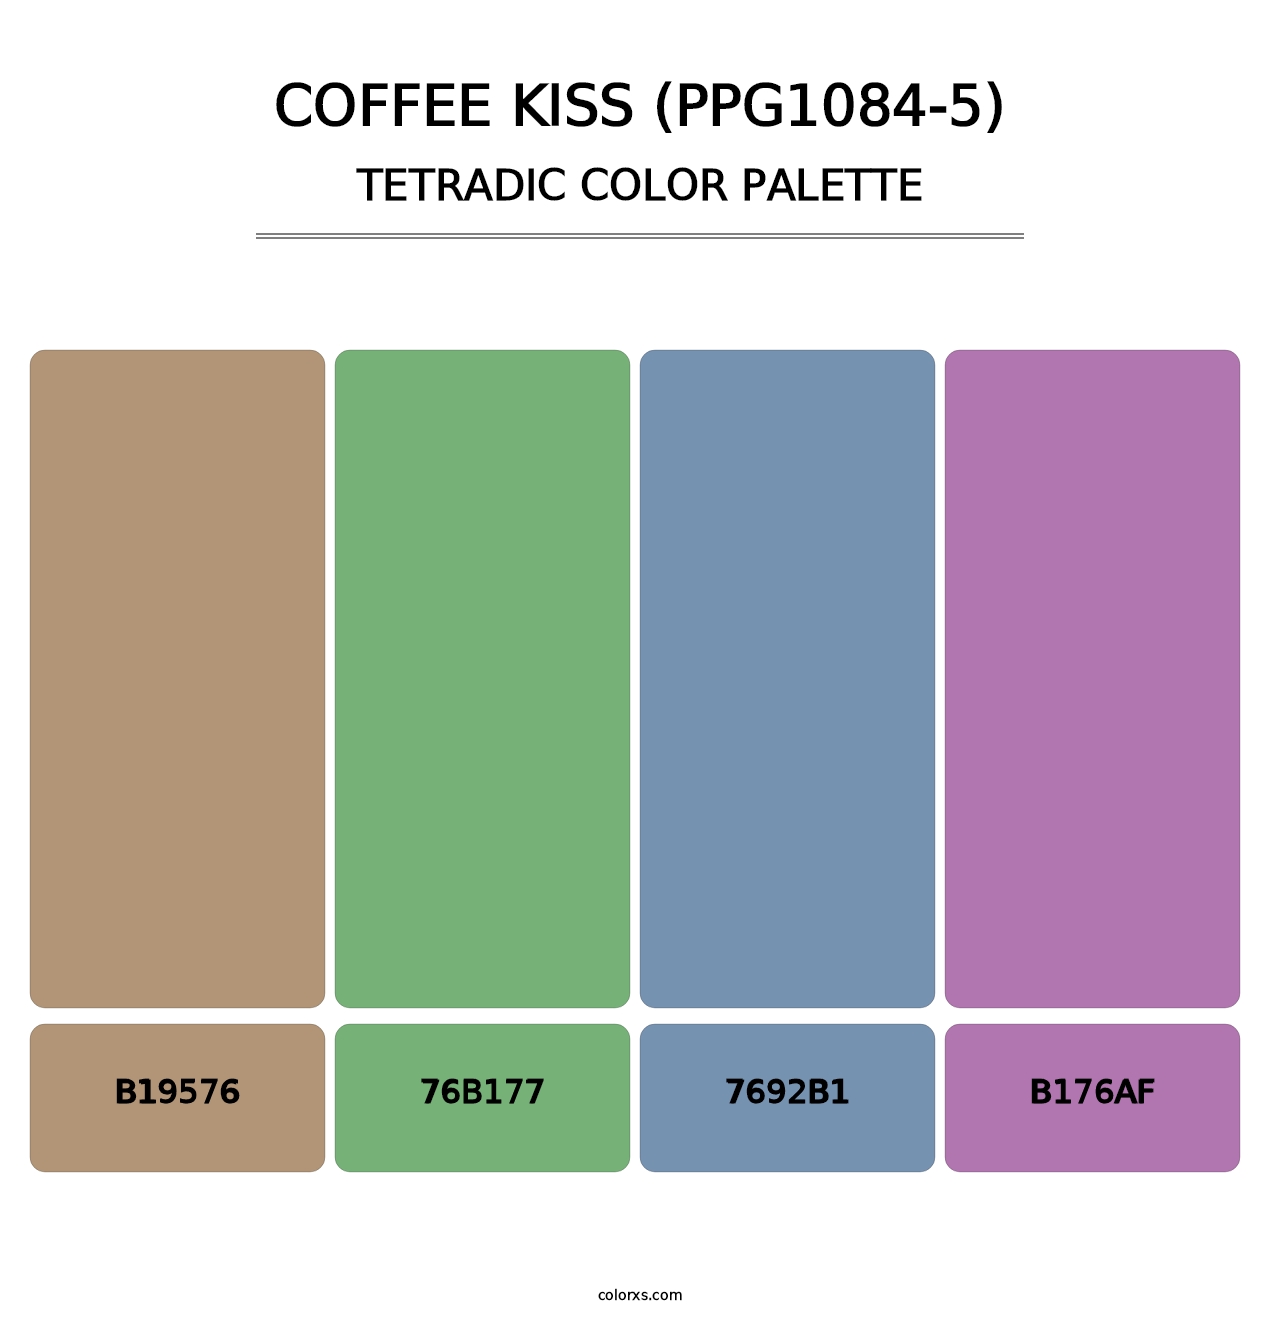 Coffee Kiss (PPG1084-5) - Tetradic Color Palette